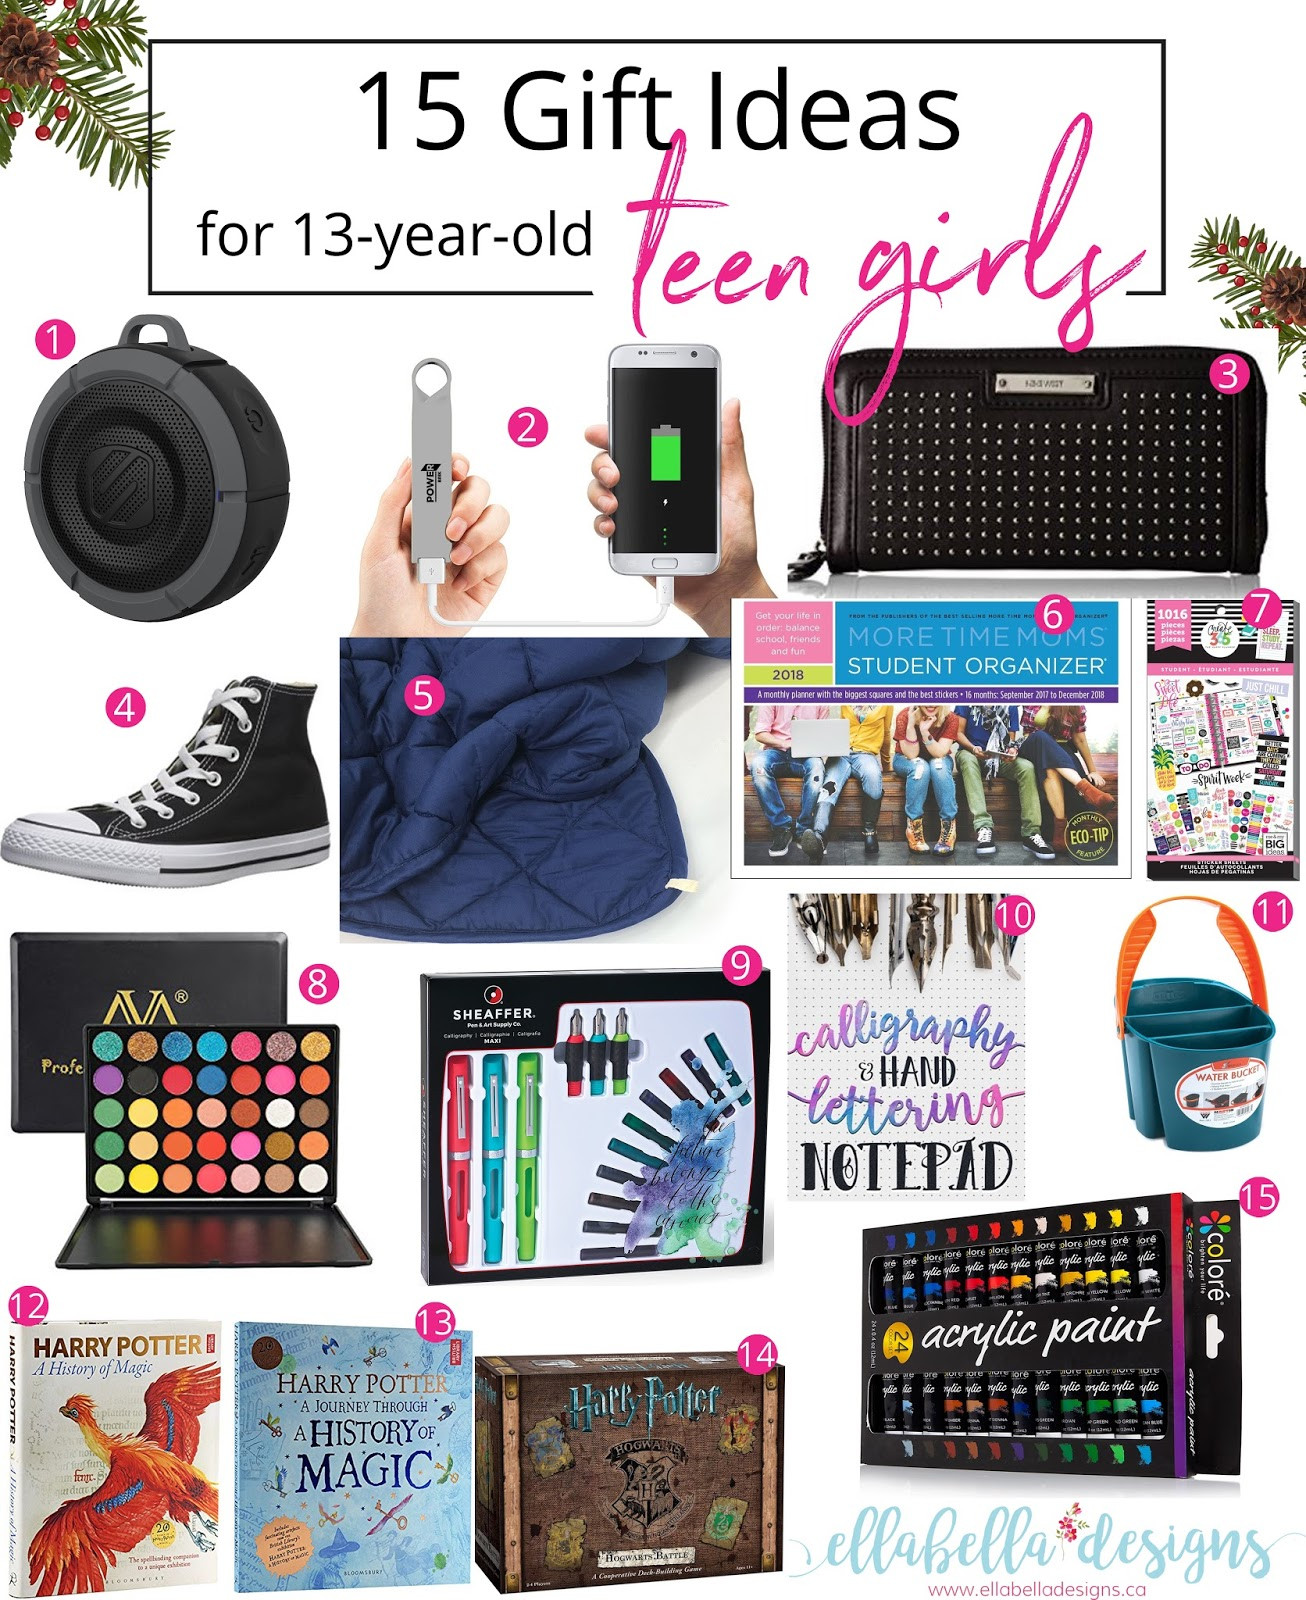 13Th Birthday Gift Ideas For Daughter
 13th birthday t ideas for daughter Gift ideas